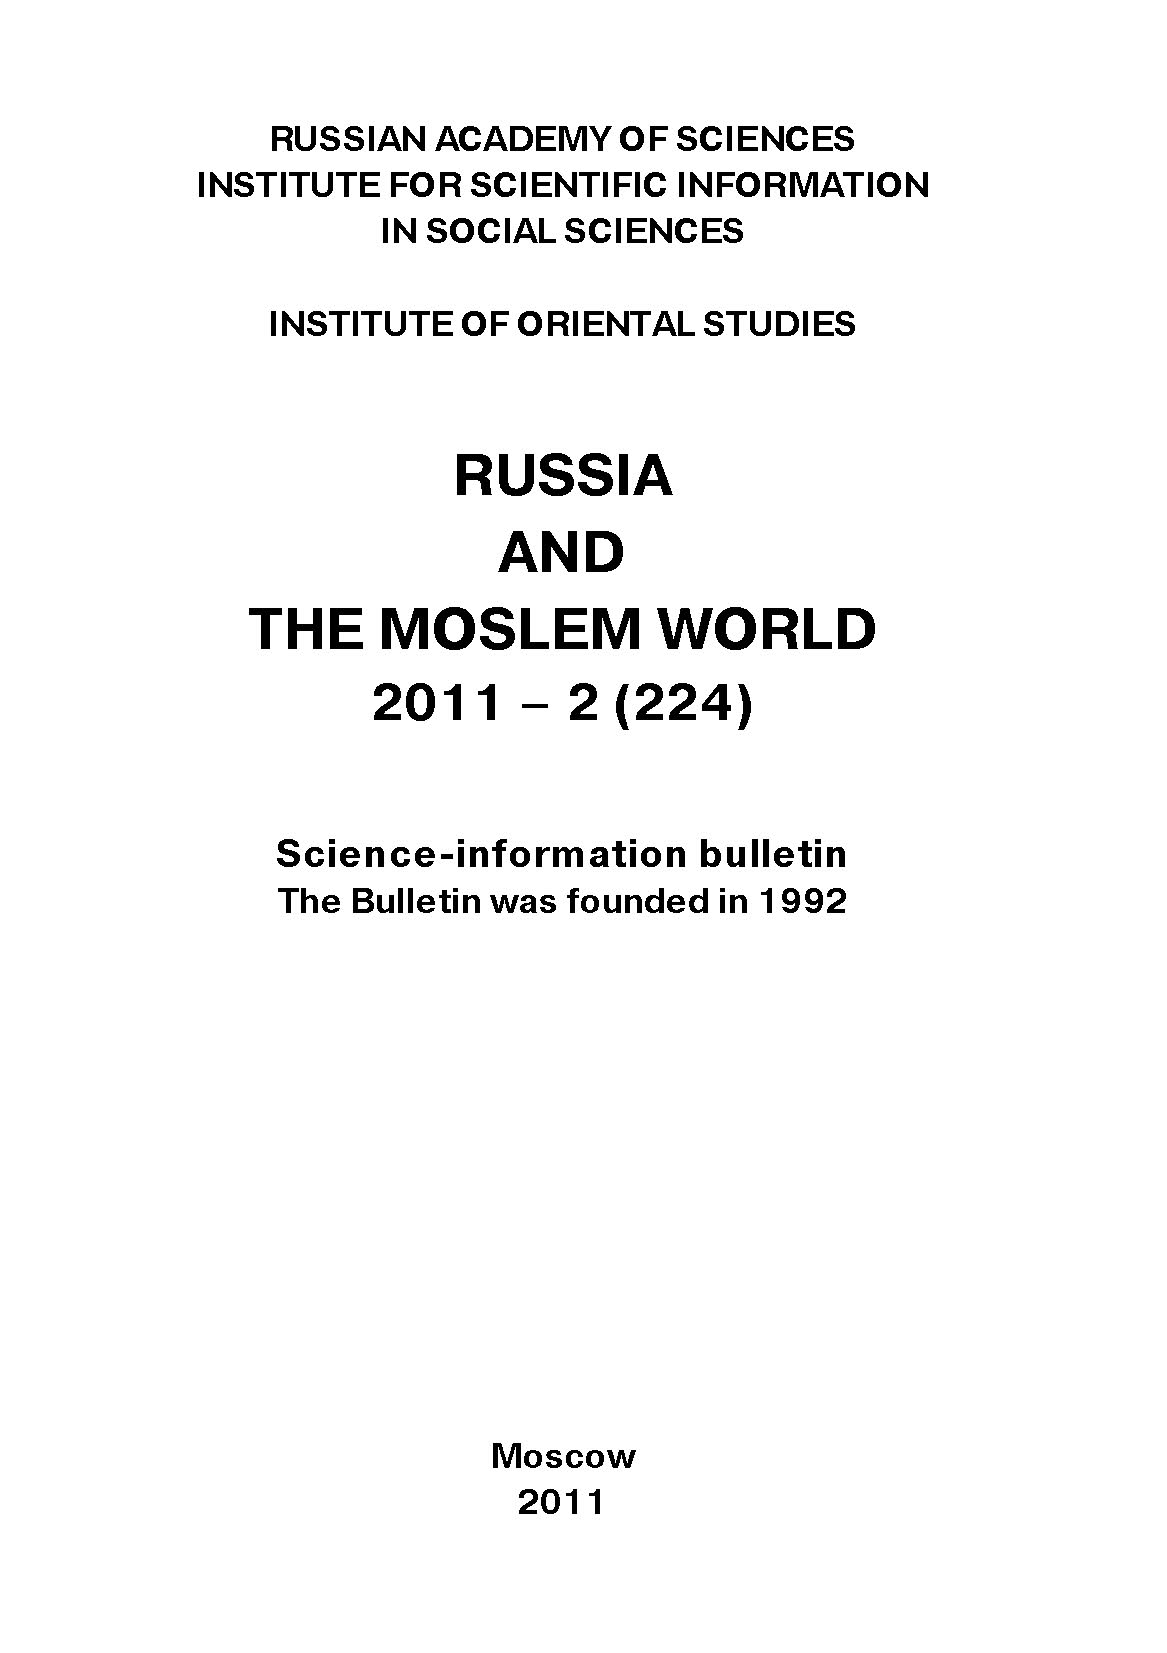 Russia and the Moslem World№ 02 / 2011